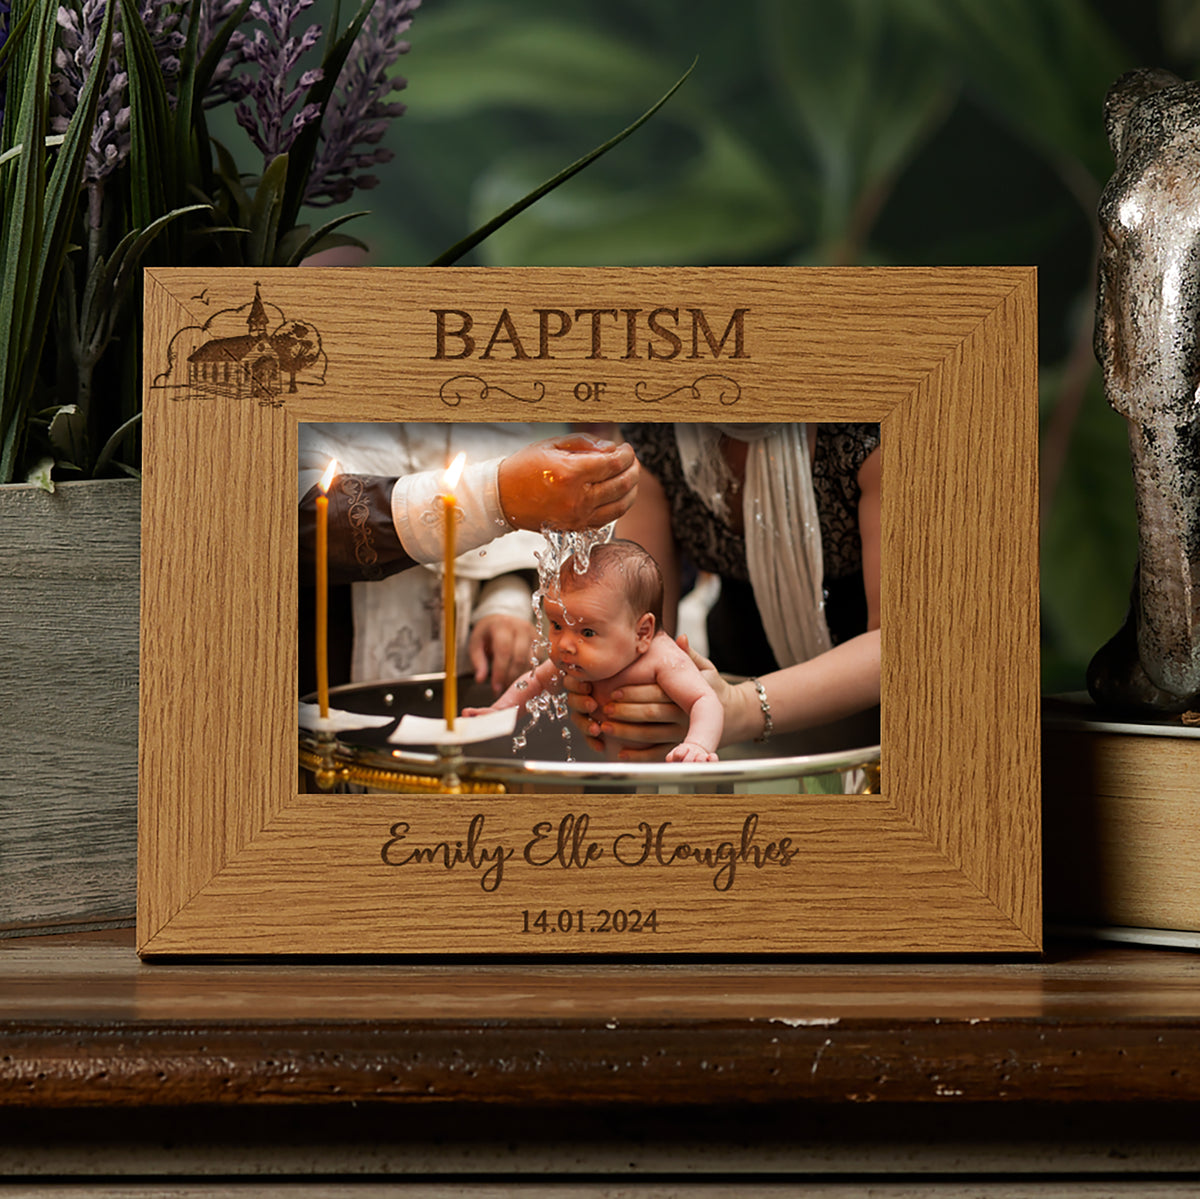 Personalised Baptism Day Photo Picture Frame Landscape With Church Sketch